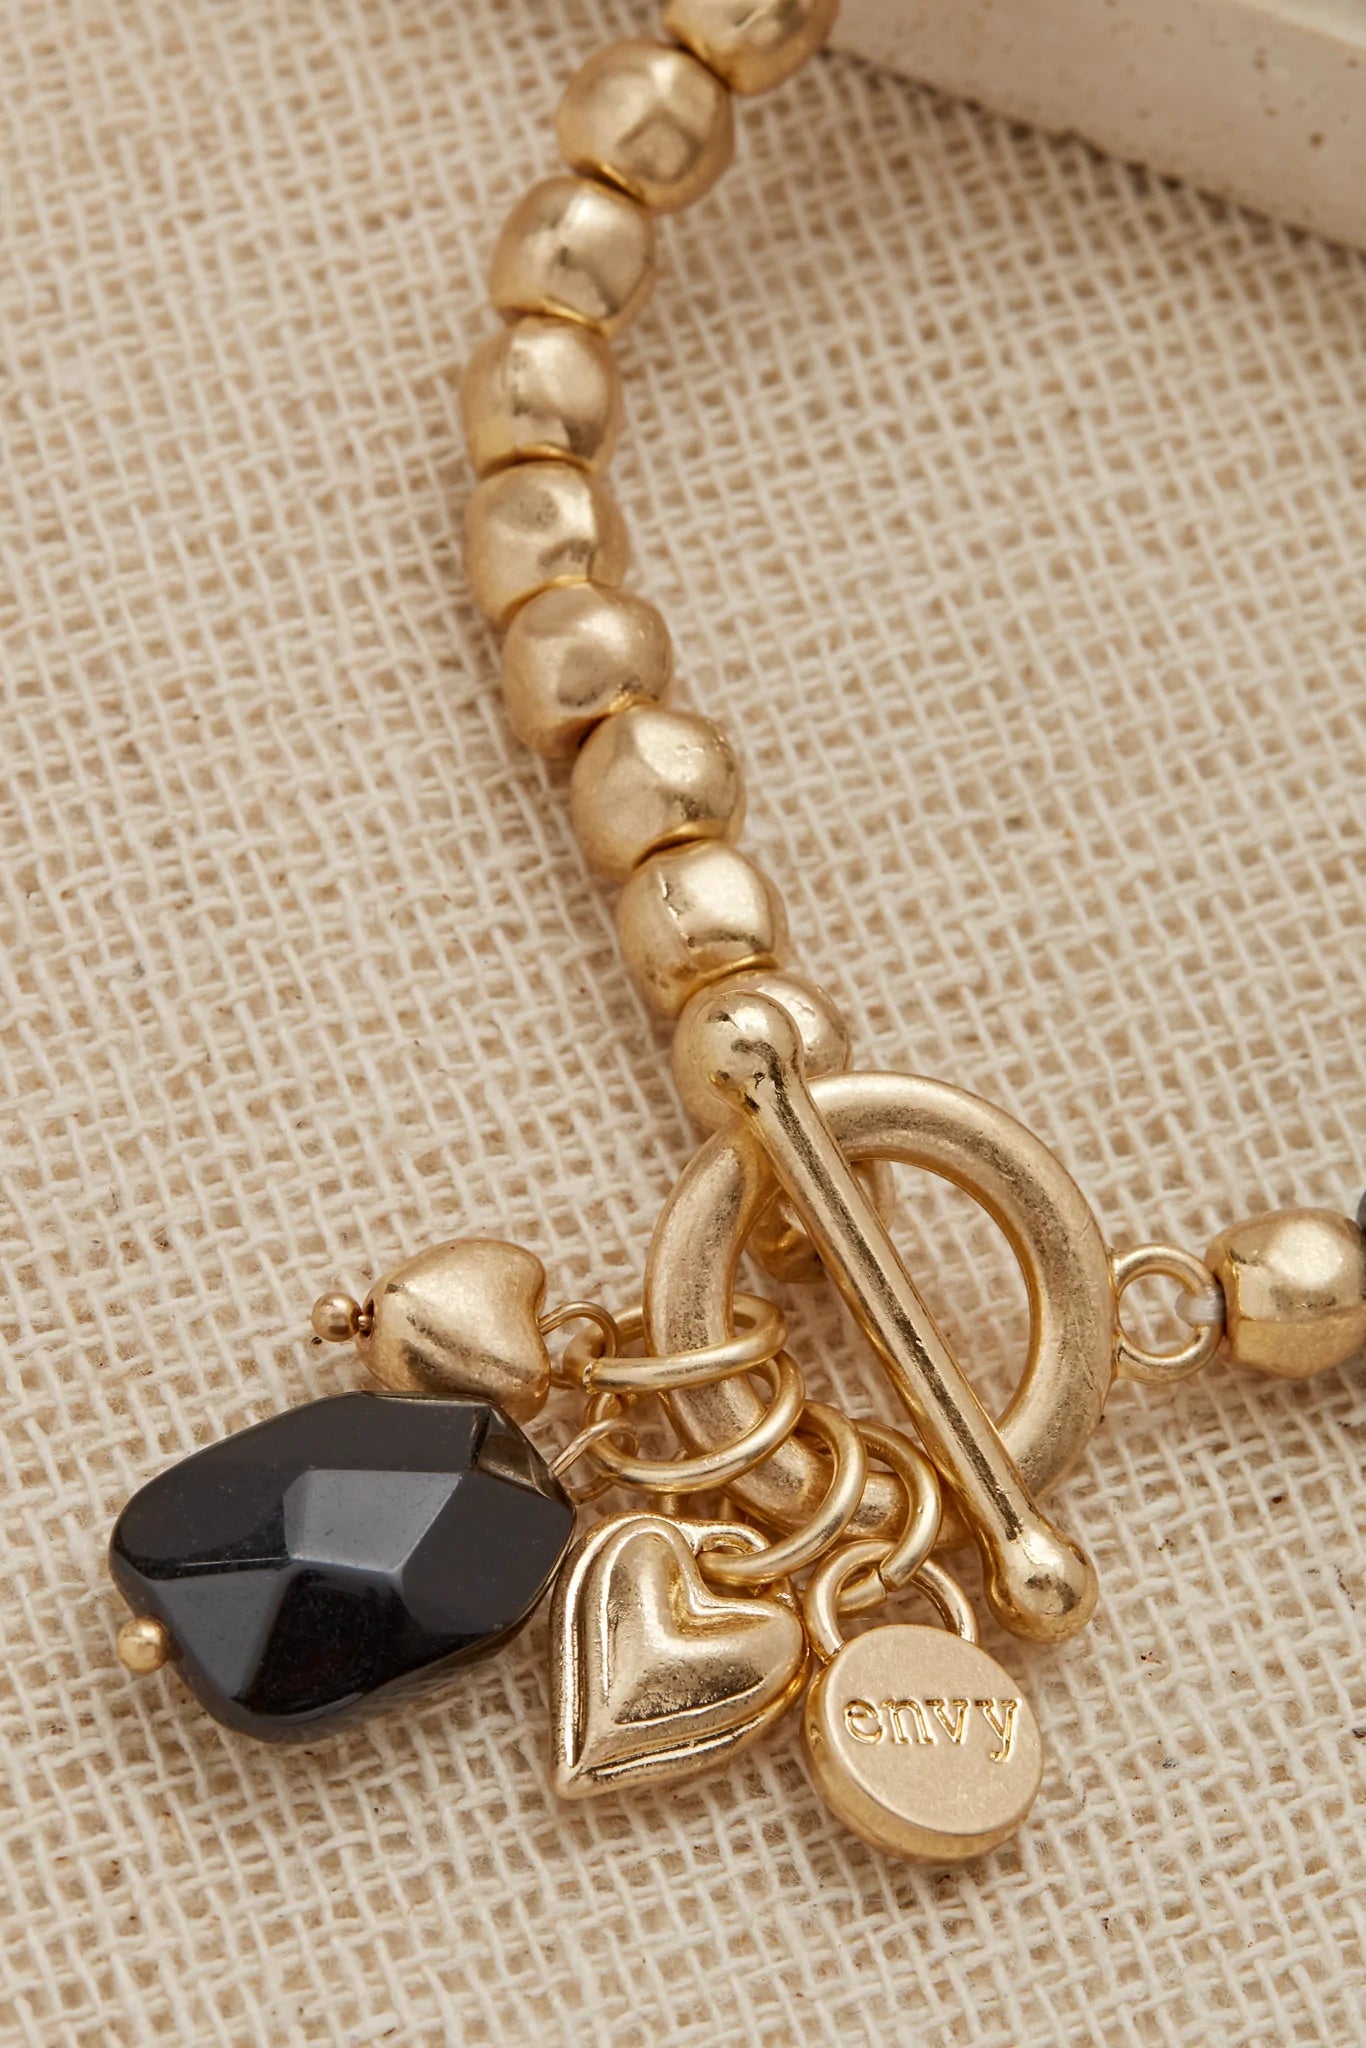 Envy Gold and Black Bead Stretch Bracelet with T Bar Clasp Detail